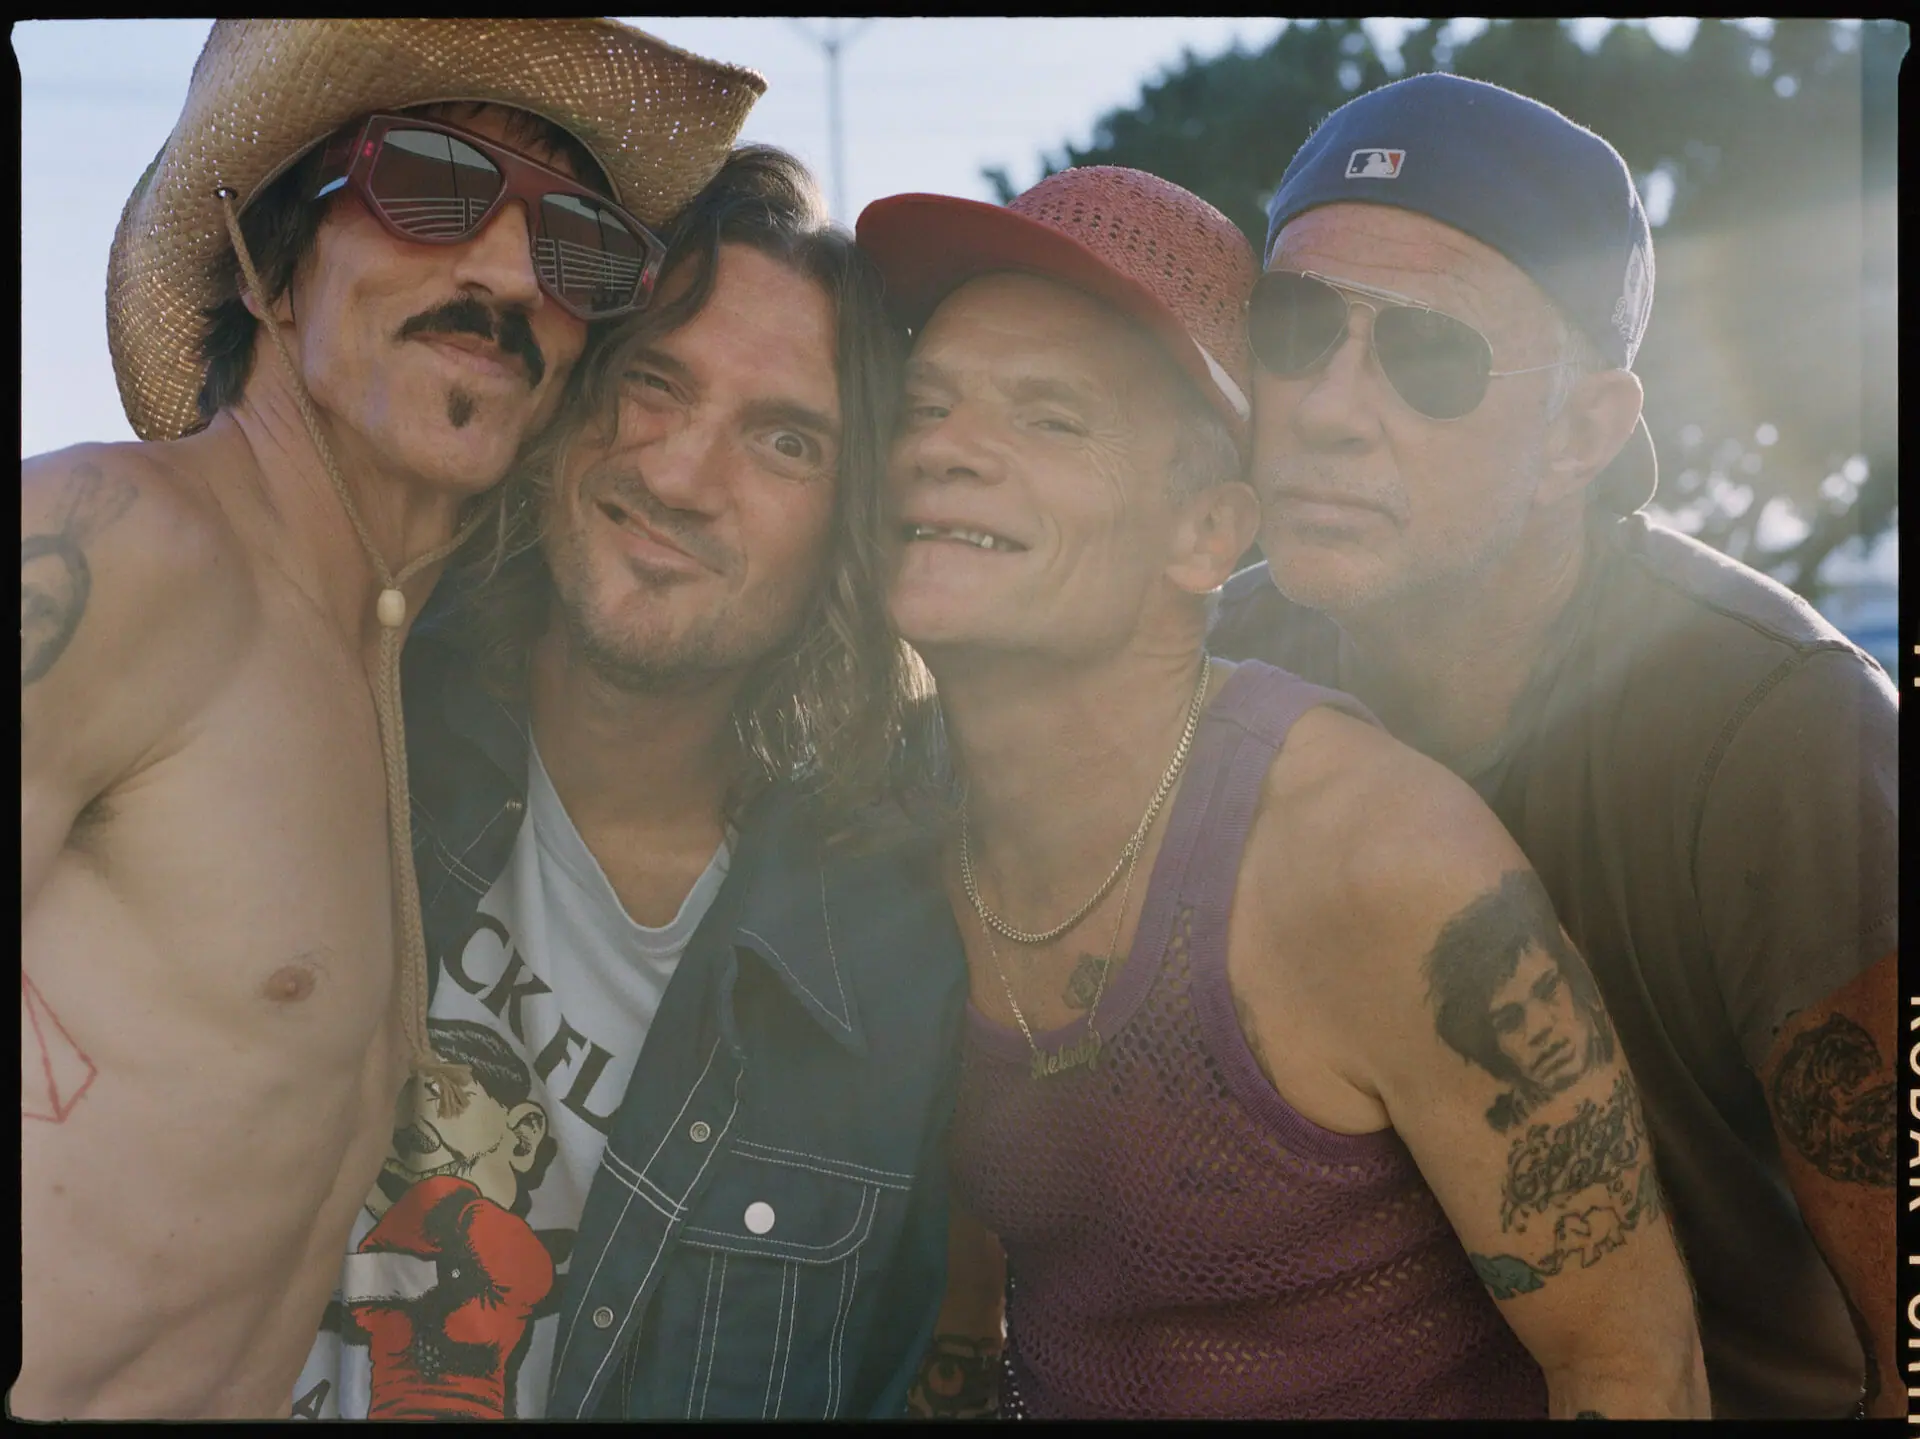 Listen Now: Red Hot Chili Peppers Pay Tribute to Eddie Van Halen on New Track “Eddie”